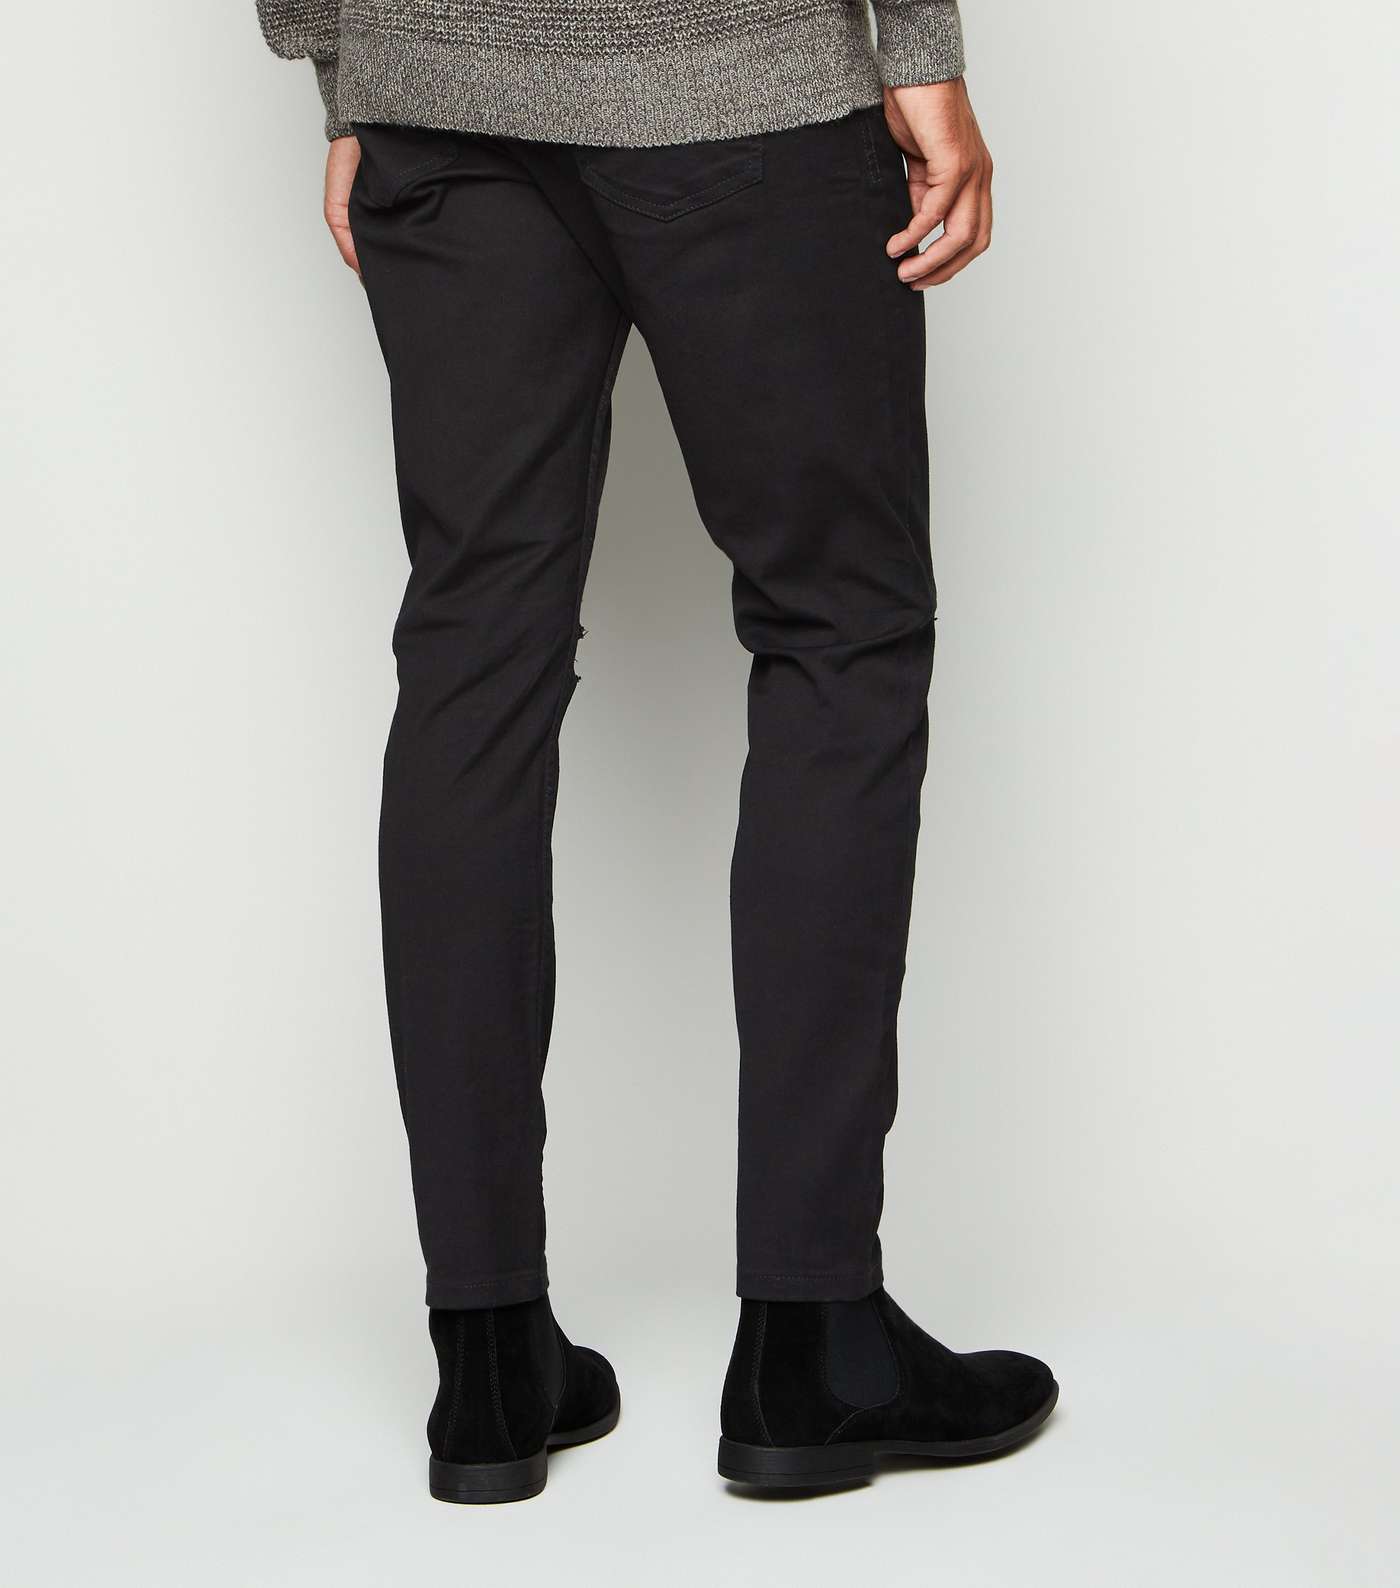 Black Ripped Knee Skinny Stretch Jeans Image 3